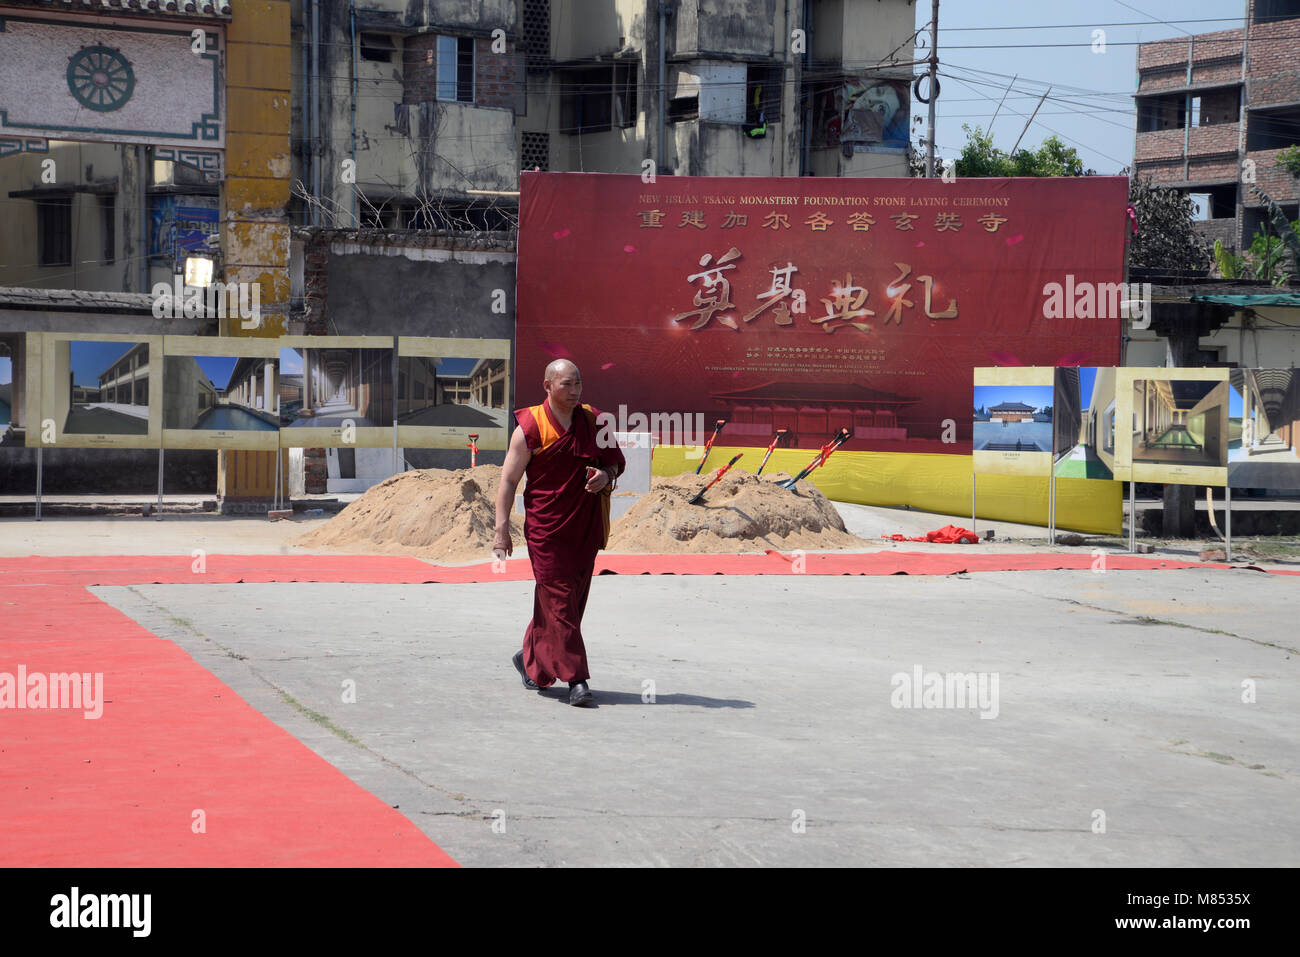 Kolkata, India. 14th Mar, 2018. Chinese Buddhist monk at monastery courtyard during of 50th anniversary of Hsuan Tsang monastery. Chinese people celebrates 50th anniversary of Hsuan Tsang monastery the only Chinese Buddhist temple in Kolkata. The Hsuan Tsang monastery built in 1968 and named after the famous Chinese Buddhist monk and traveler Hsuan Tsang who came to India about 1400 years ago. Credit: Saikat Paul/Pacific Press/Alamy Live News Stock Photo